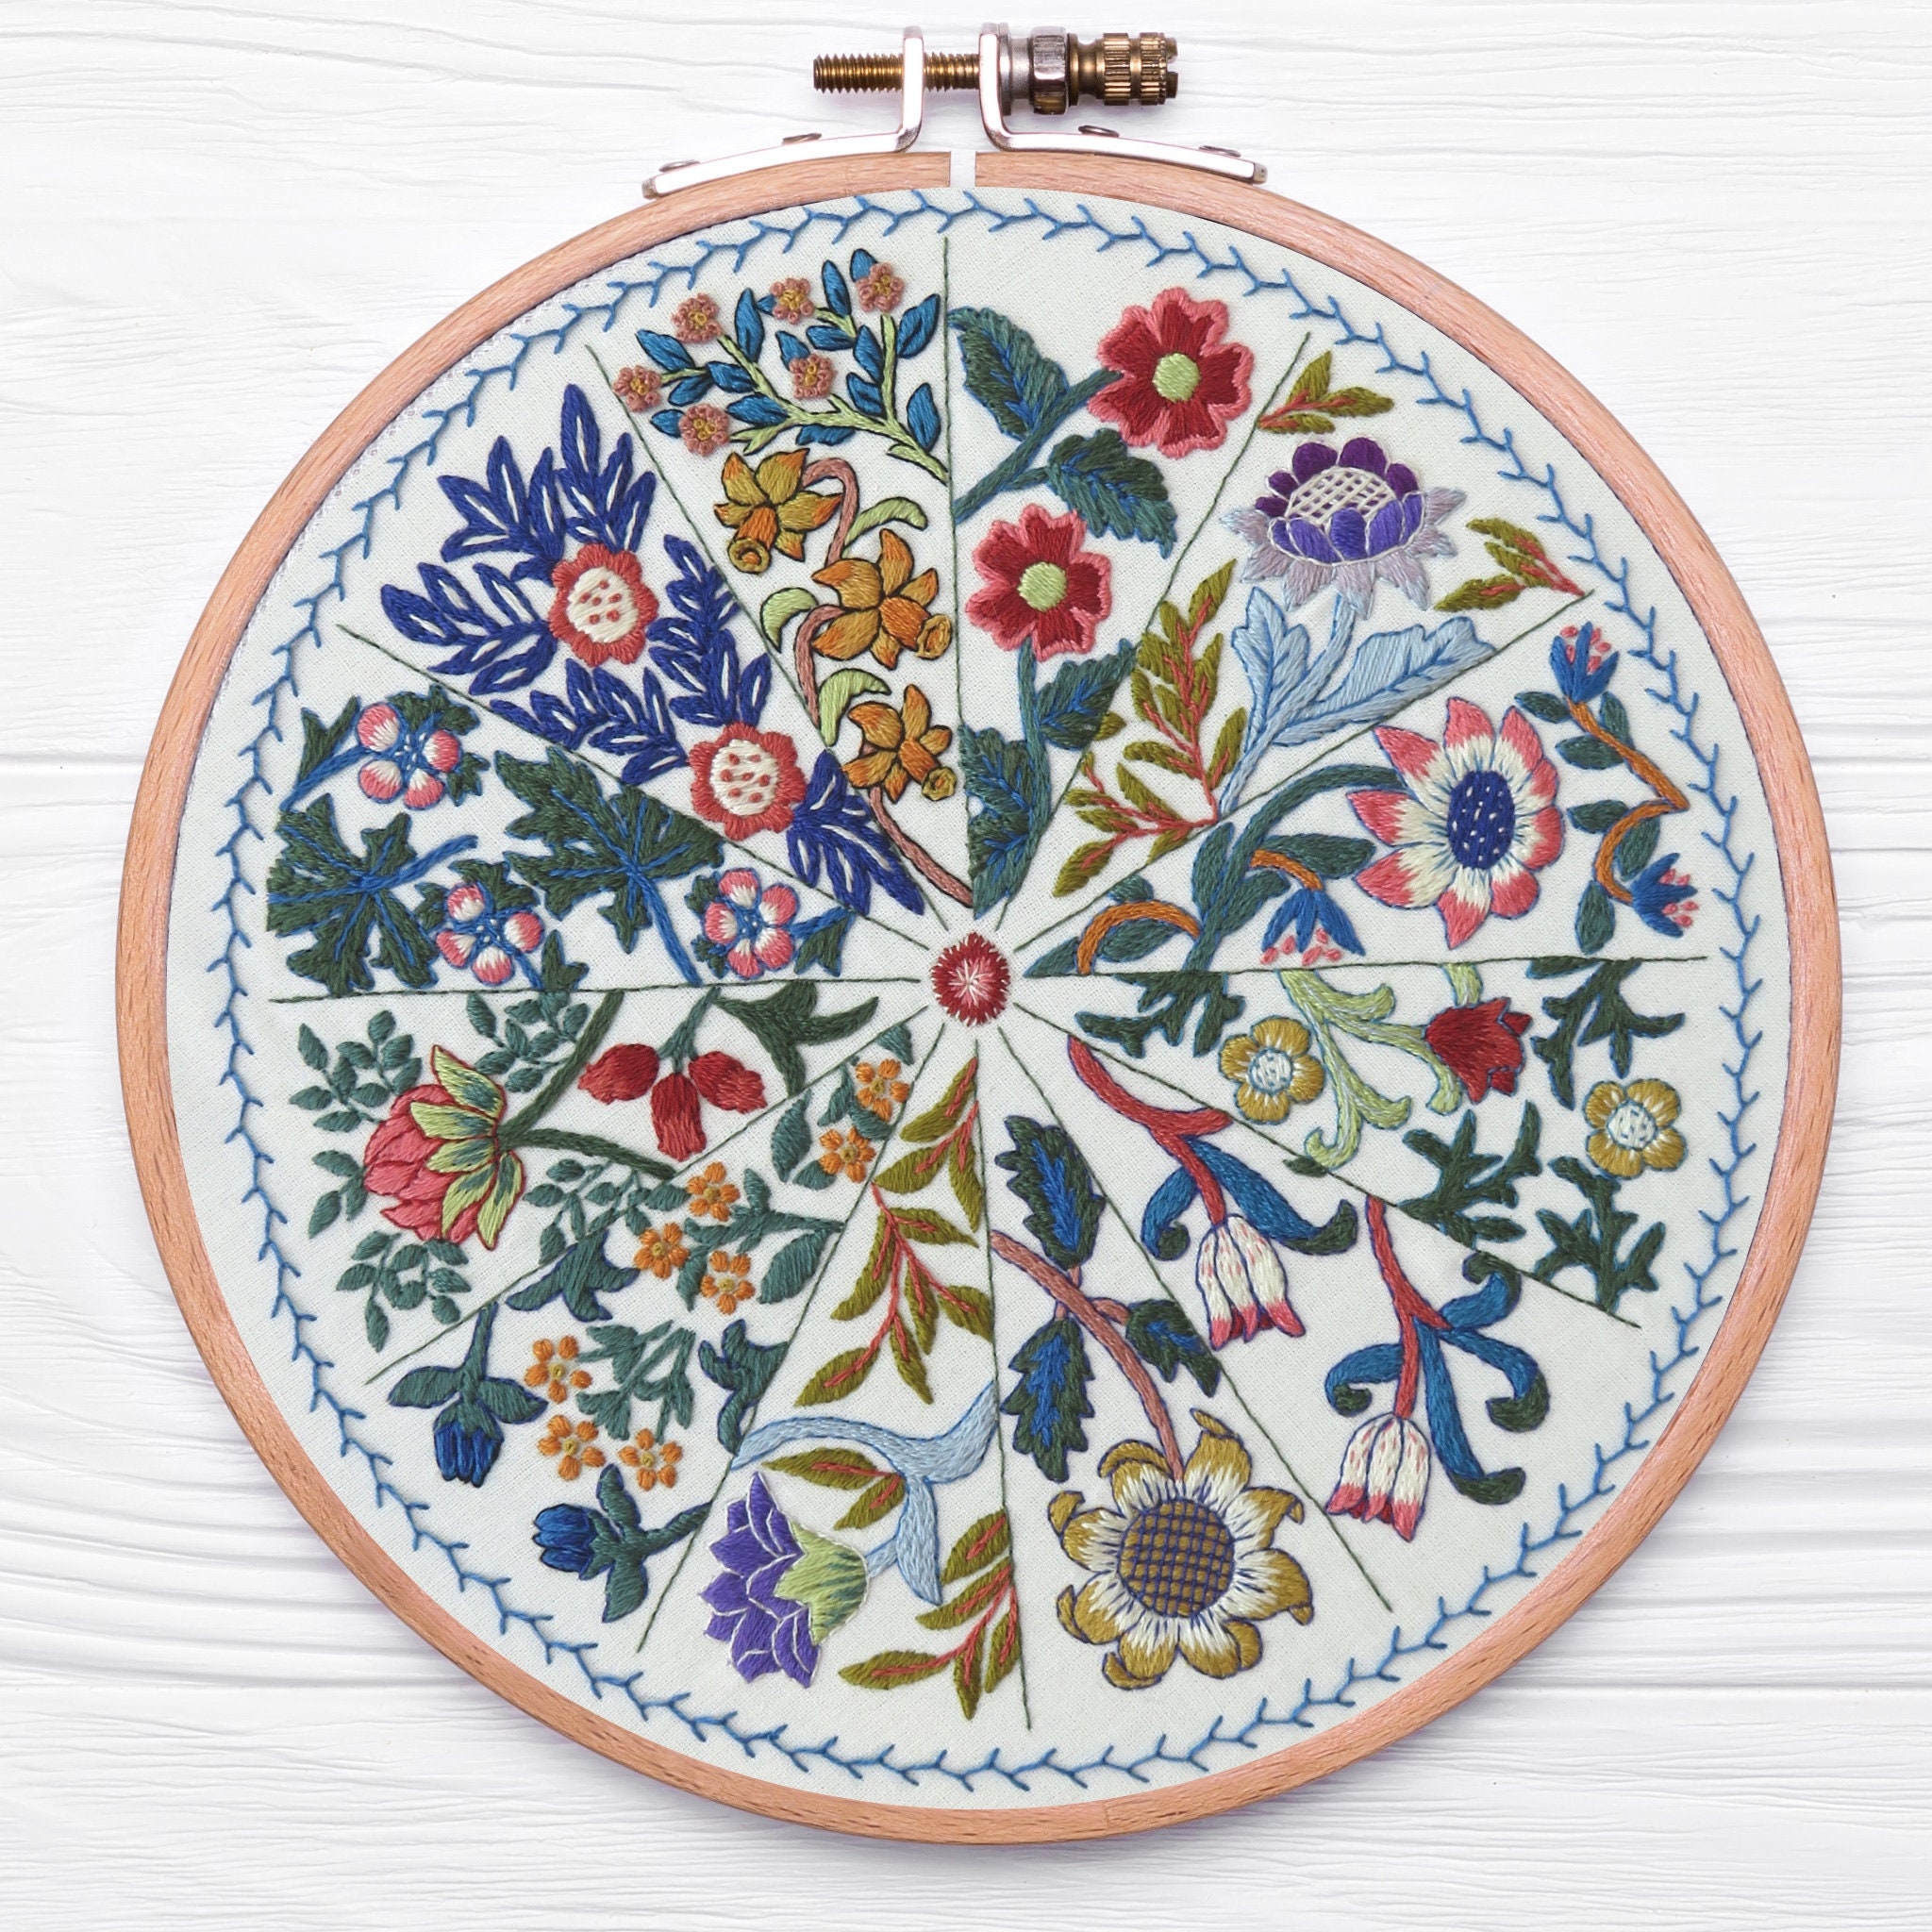 Beautiful Embroidery Kits for Beginners, Easy to Follow Preprinted  Embroidery Pattern, Presents for Her, Holiday Craft, Learn to Embroidery 